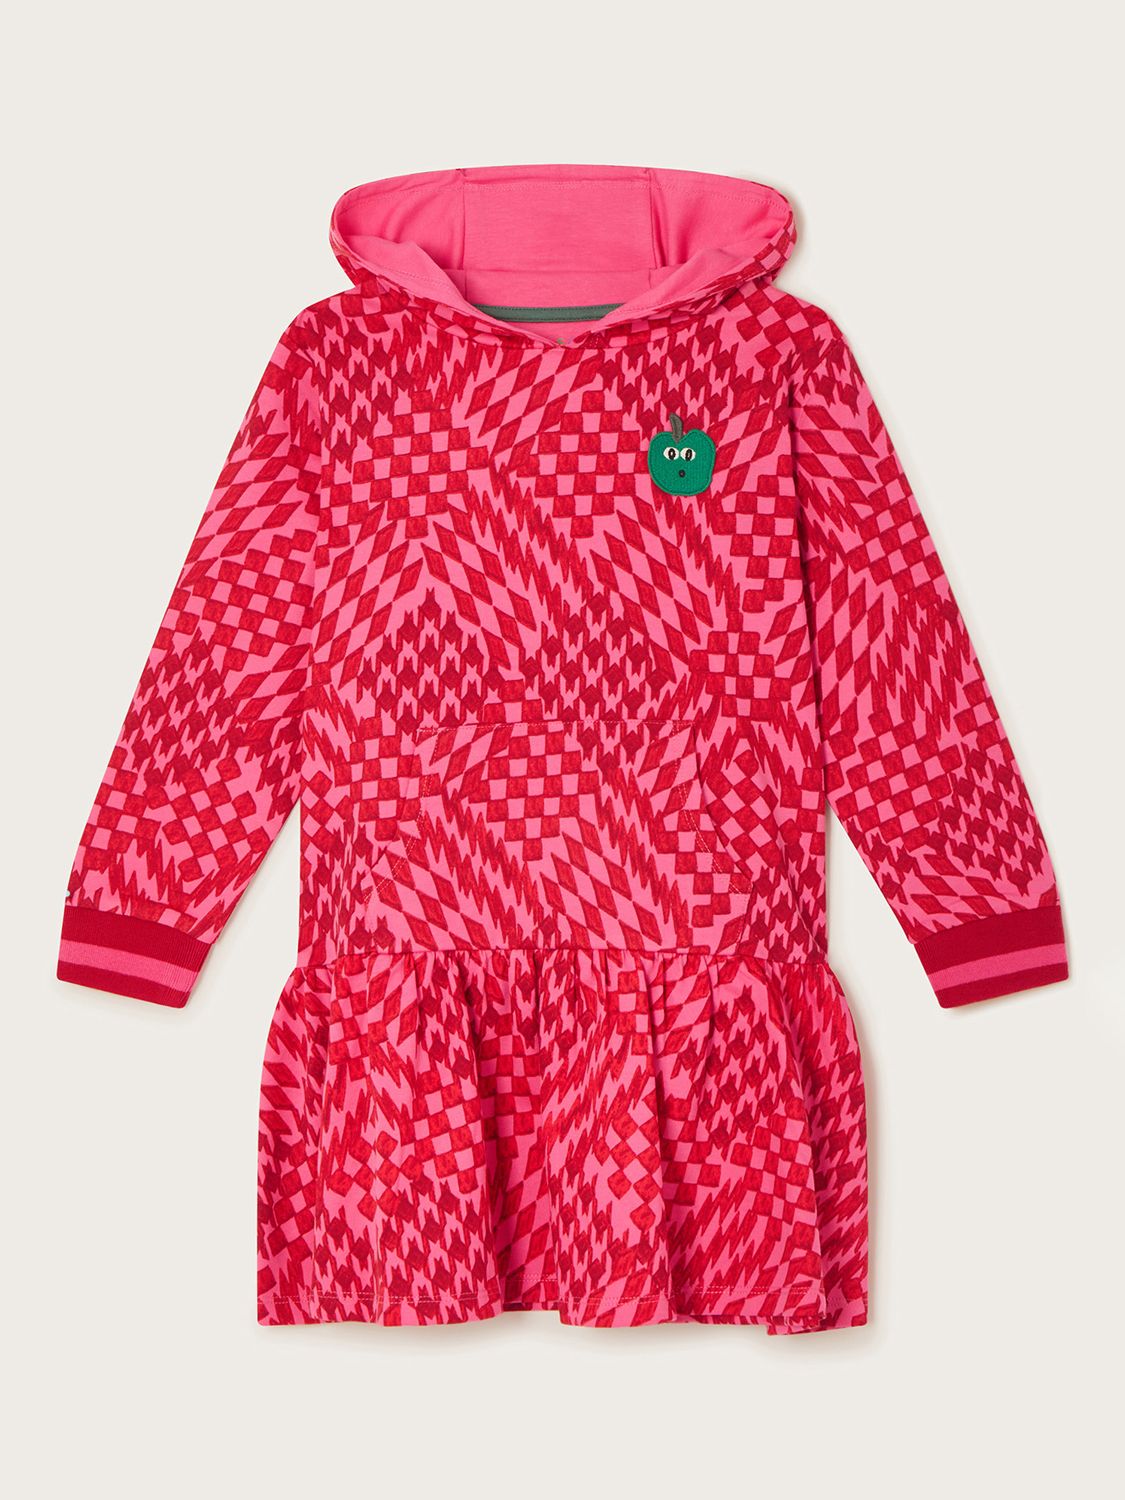 Monsoon Kids' Apple Abstract Print Hooded Skater Dress, Red, 5-6 years